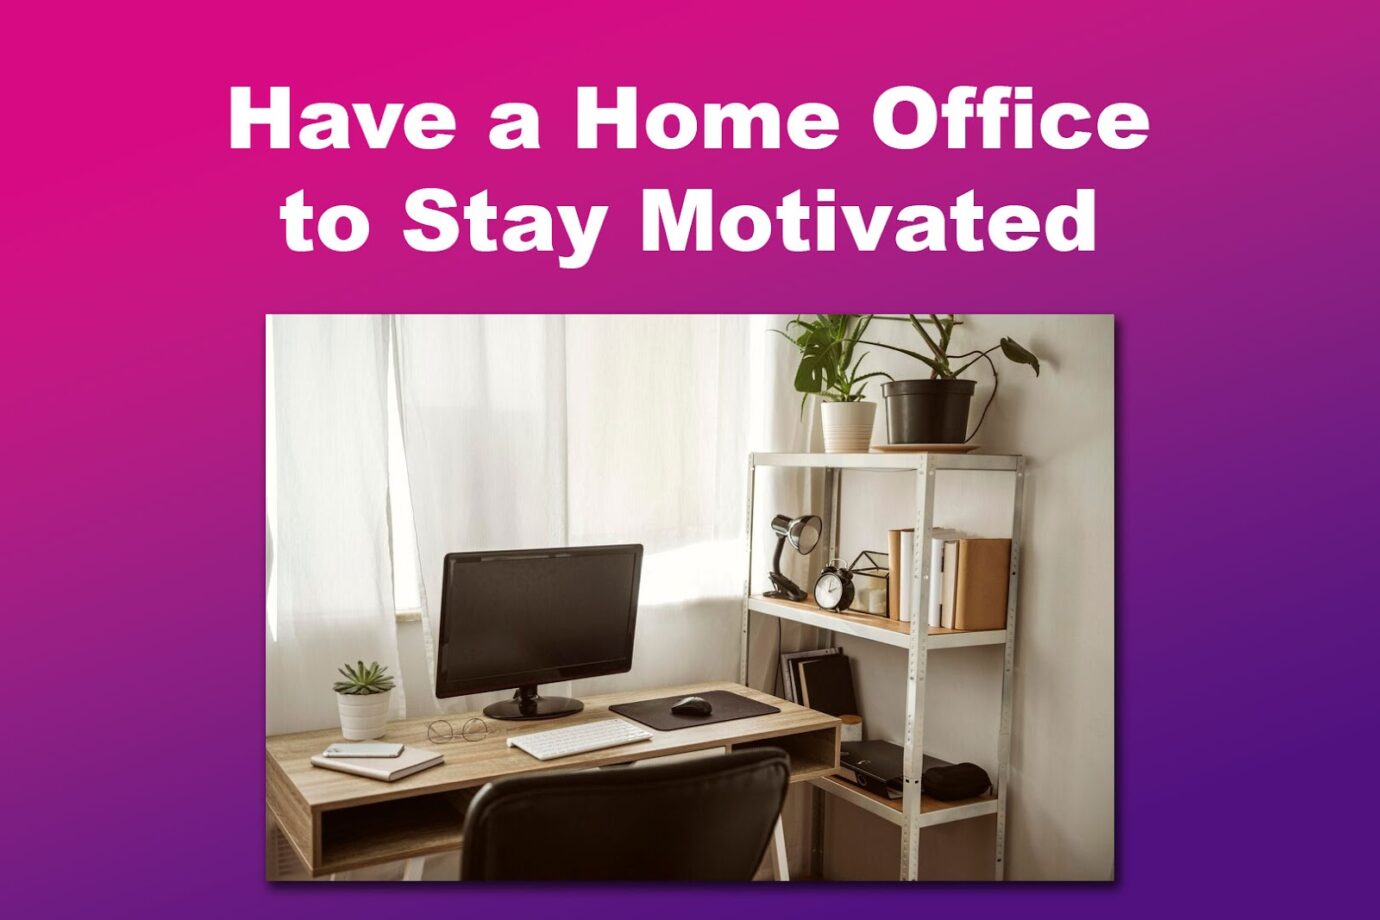 How to Stay Motivated Working From Home - Home Office